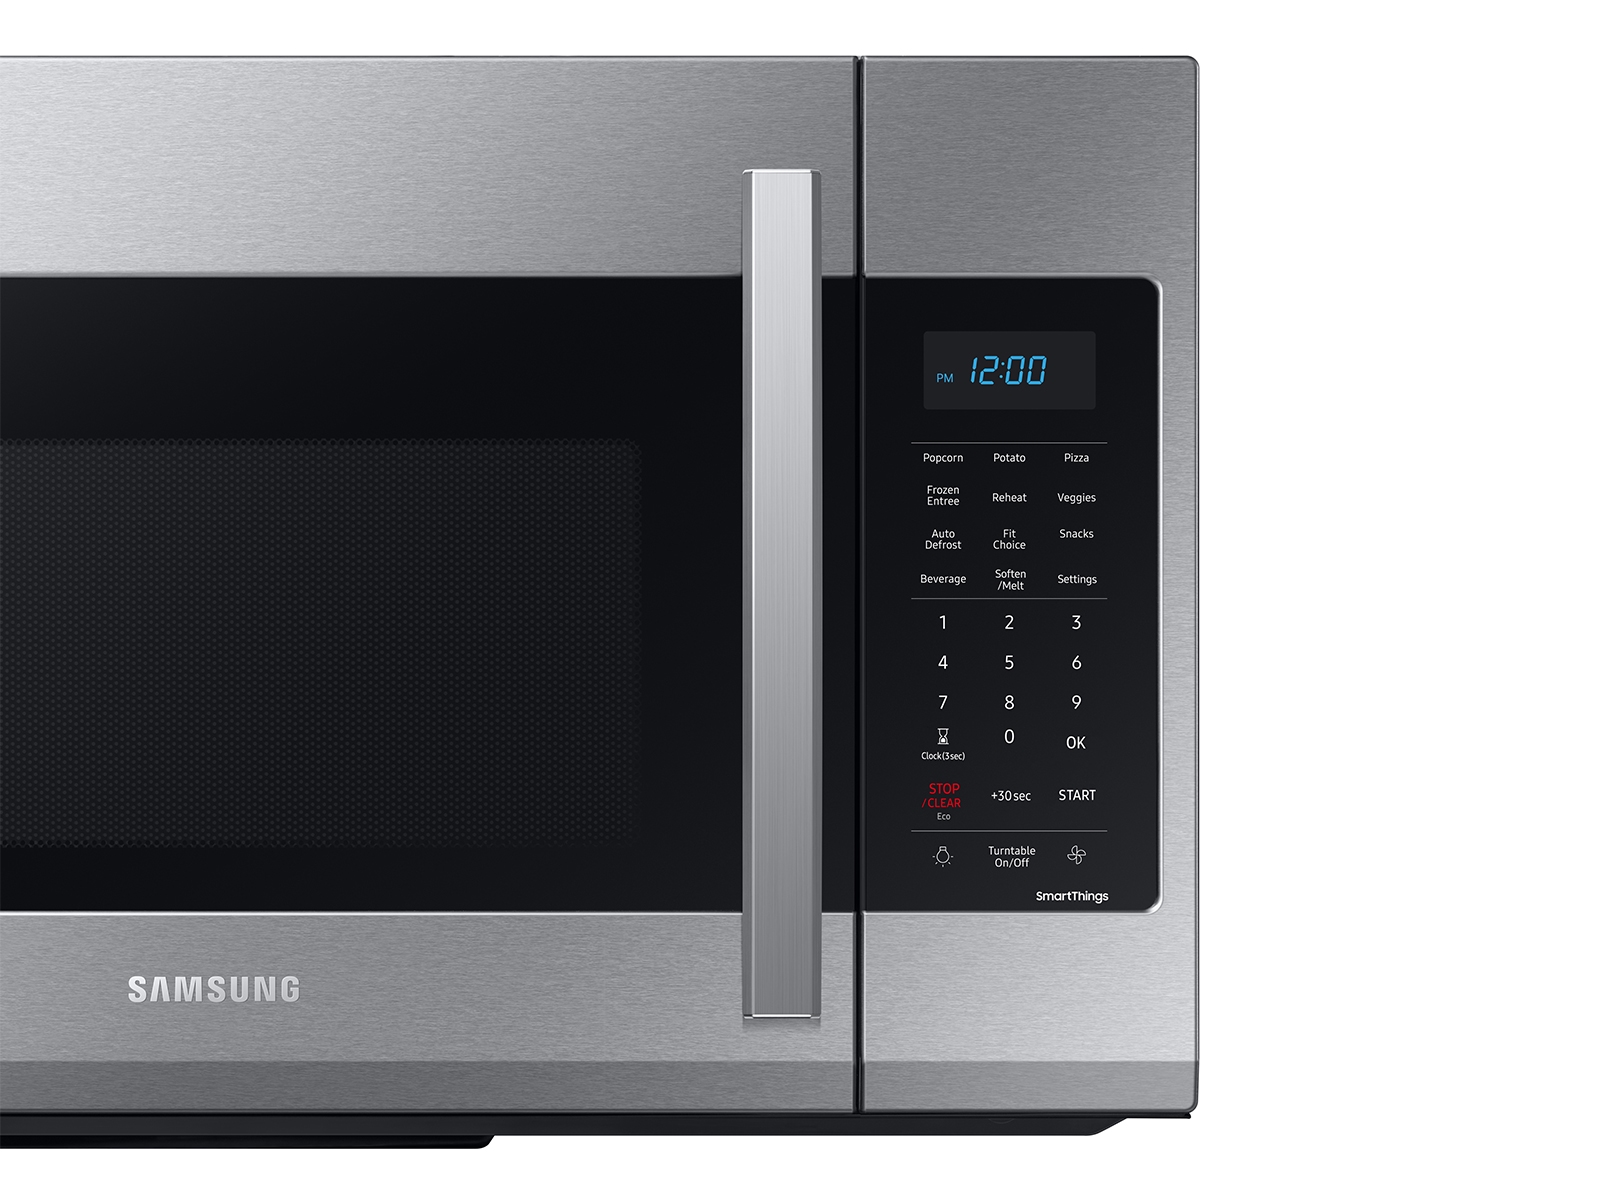 Microwave Ovens : Target